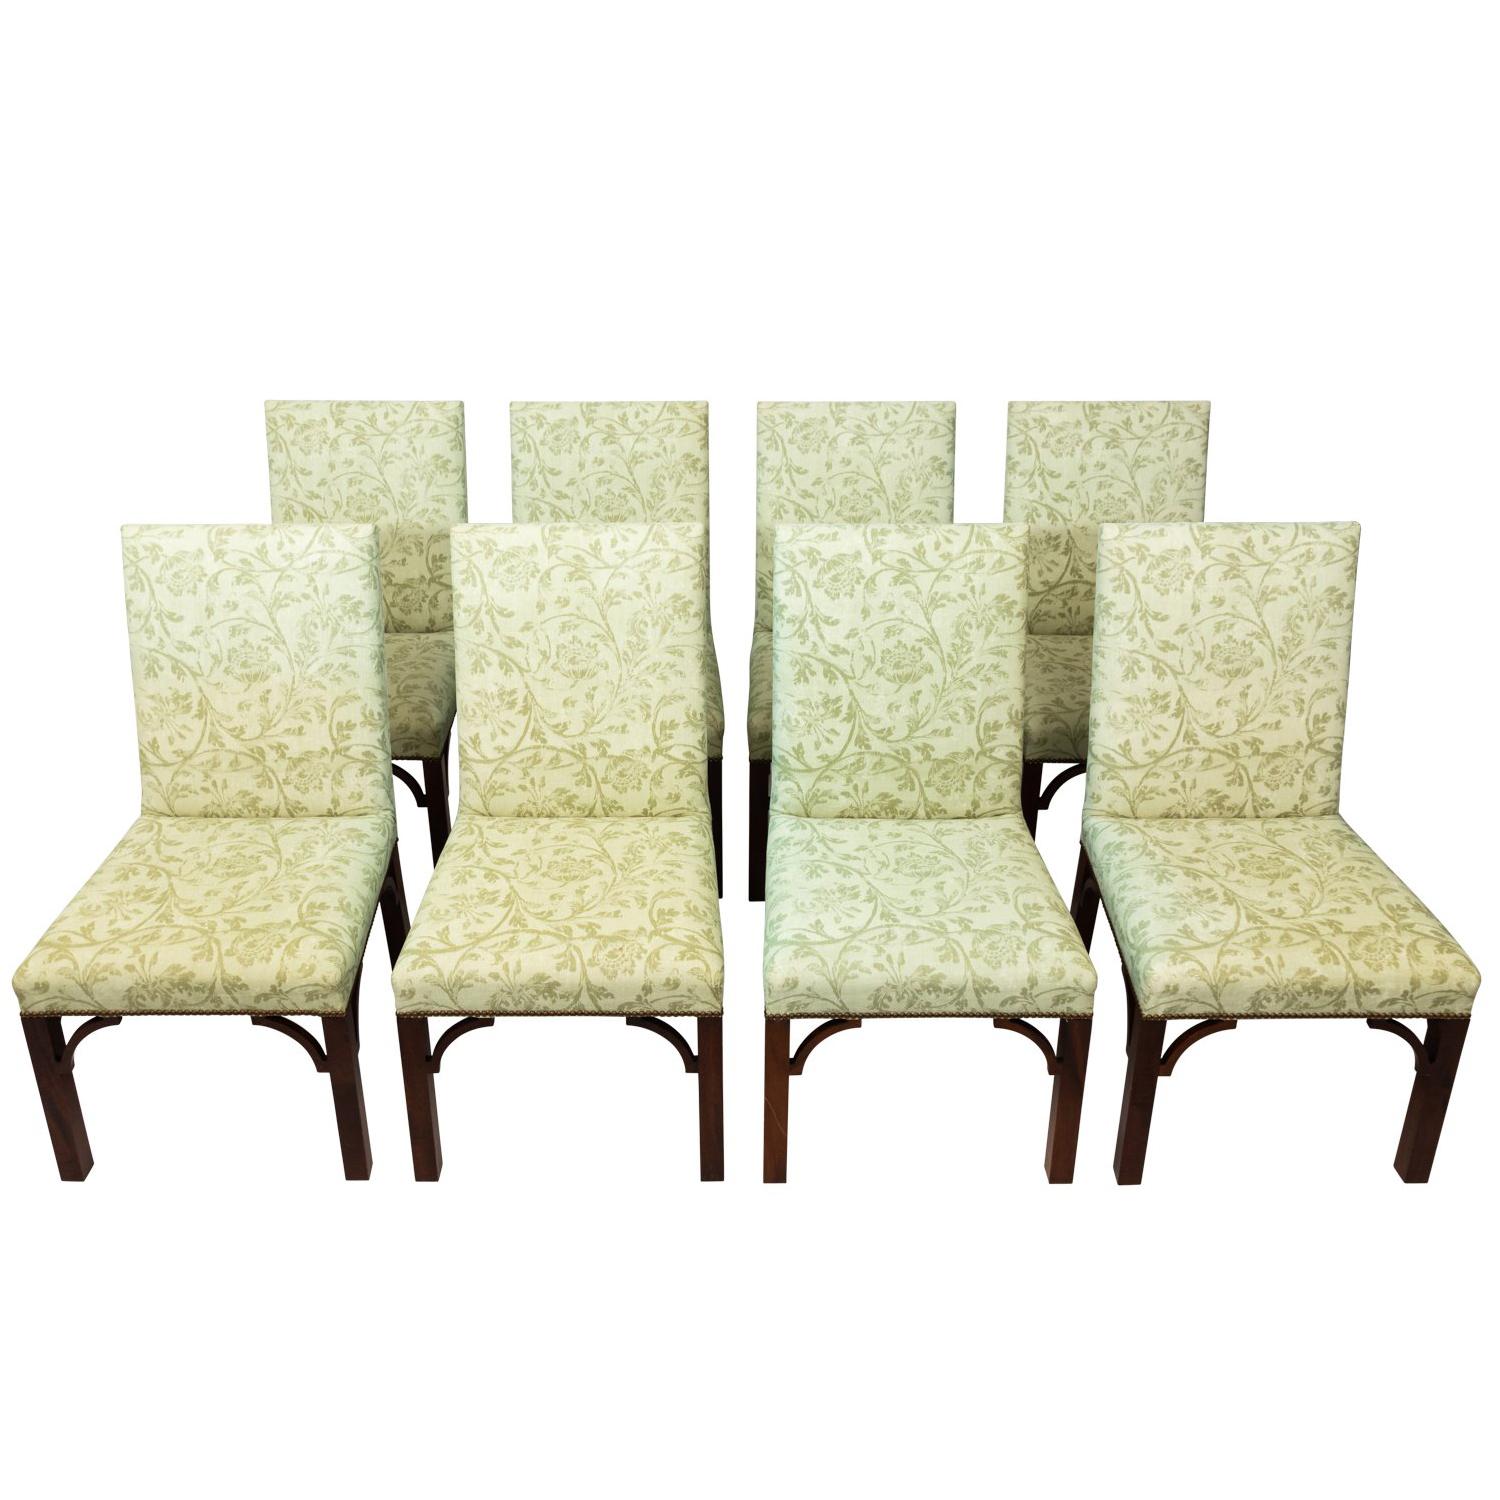 Set of Upholstered Dining Chairs